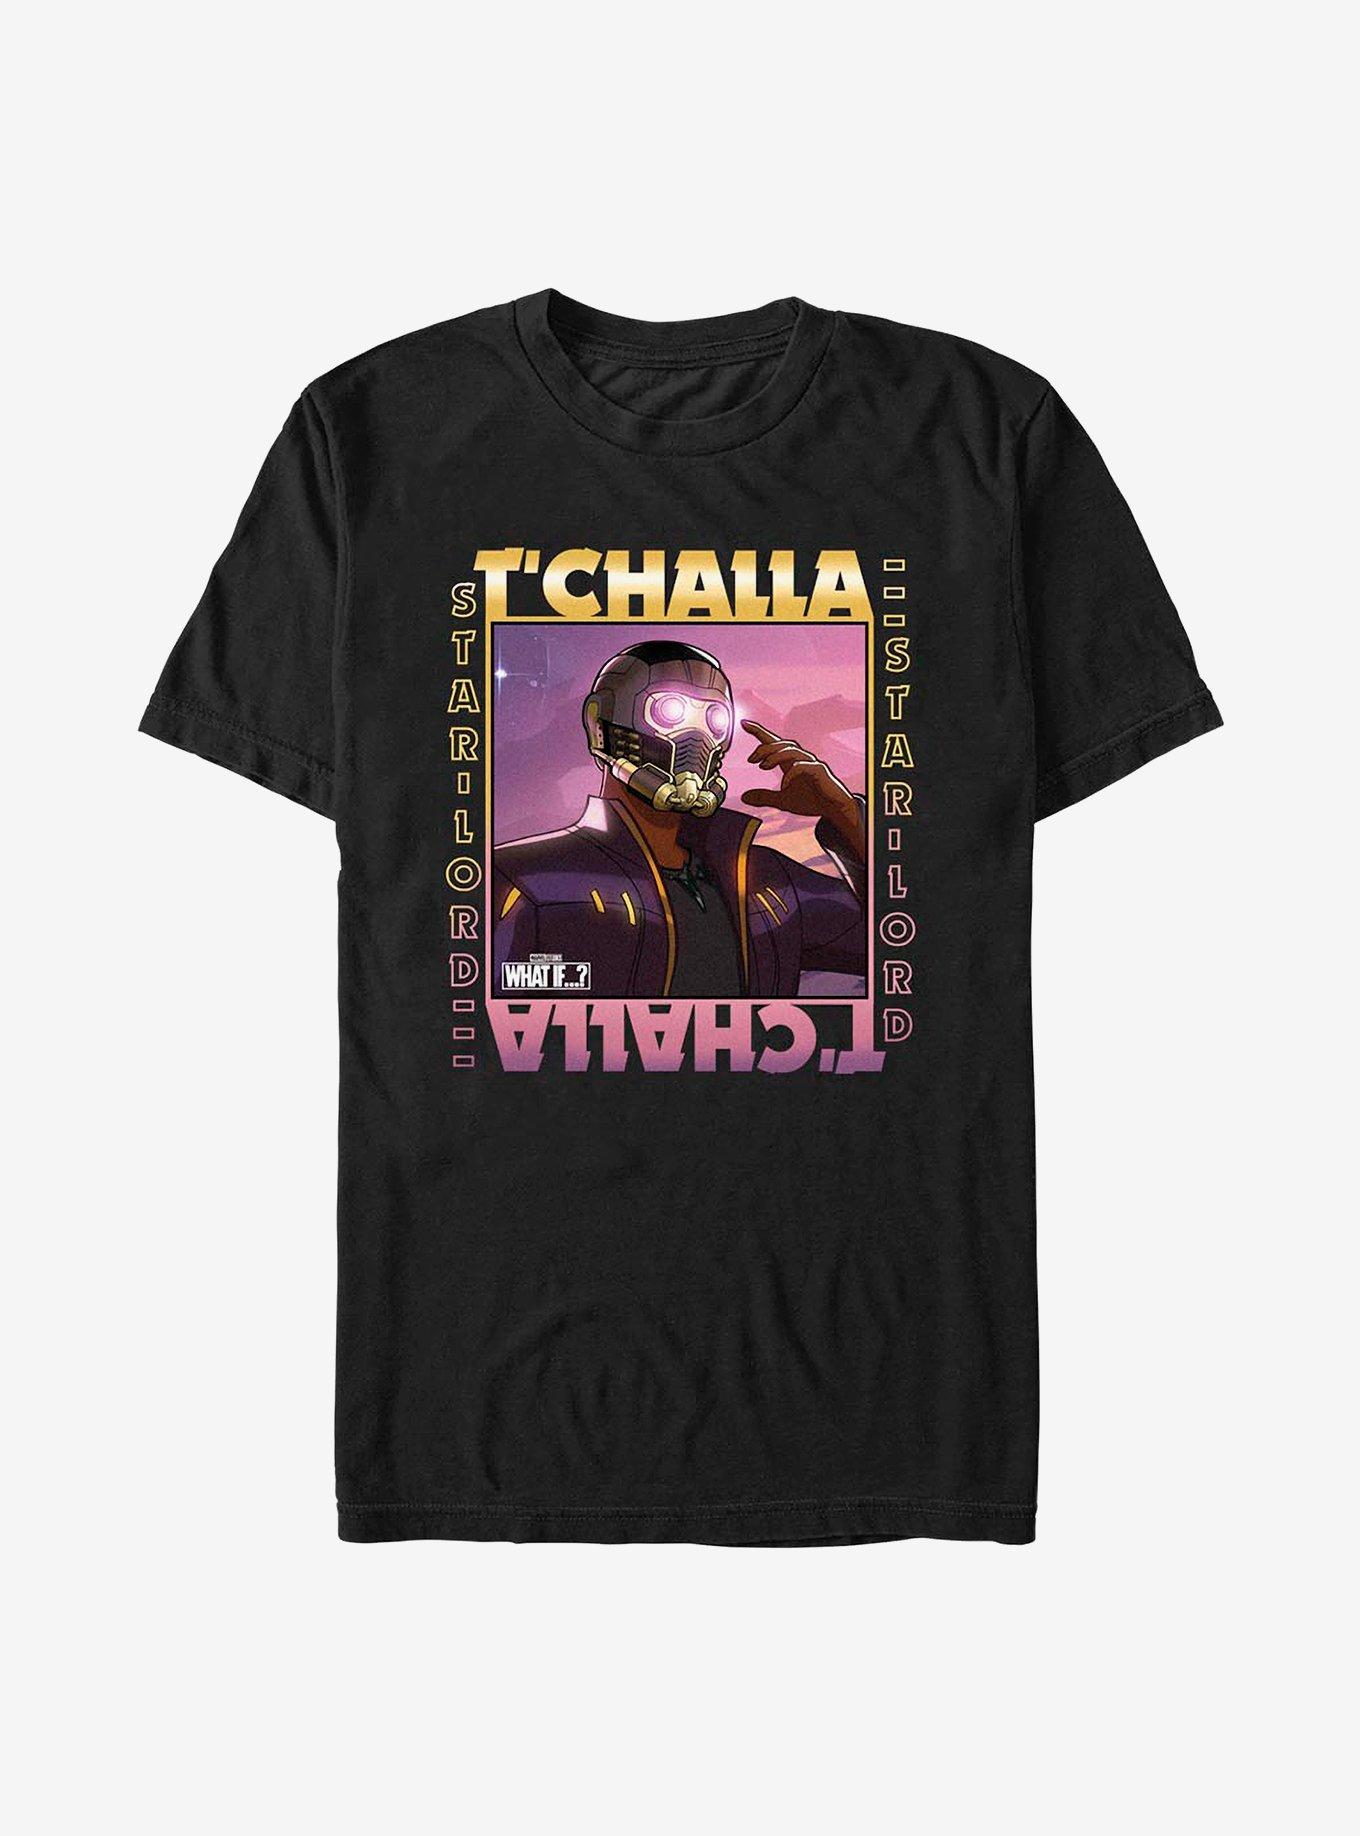 Marvel What If...? T'Challa Was Star-Lord Frame T-Shirt